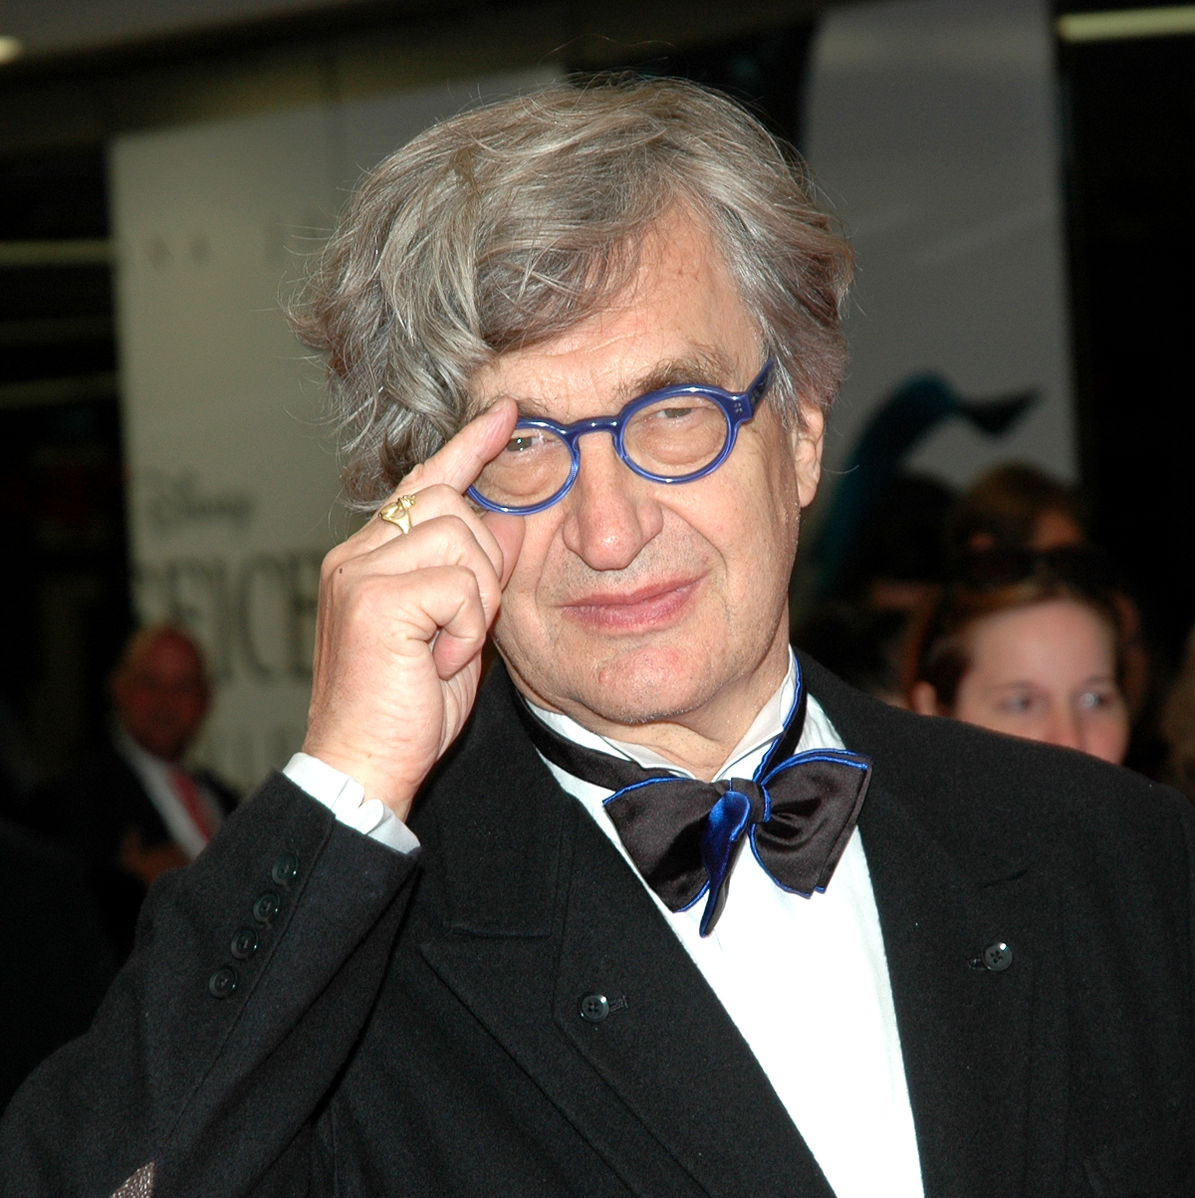 Director Wim Wenders dressed in blue glasses, a black suit, and a bow tie with blue accents. "Wim Wenders 0566" by Harald Bischoff is licensed under CC BY-SA 3.0.